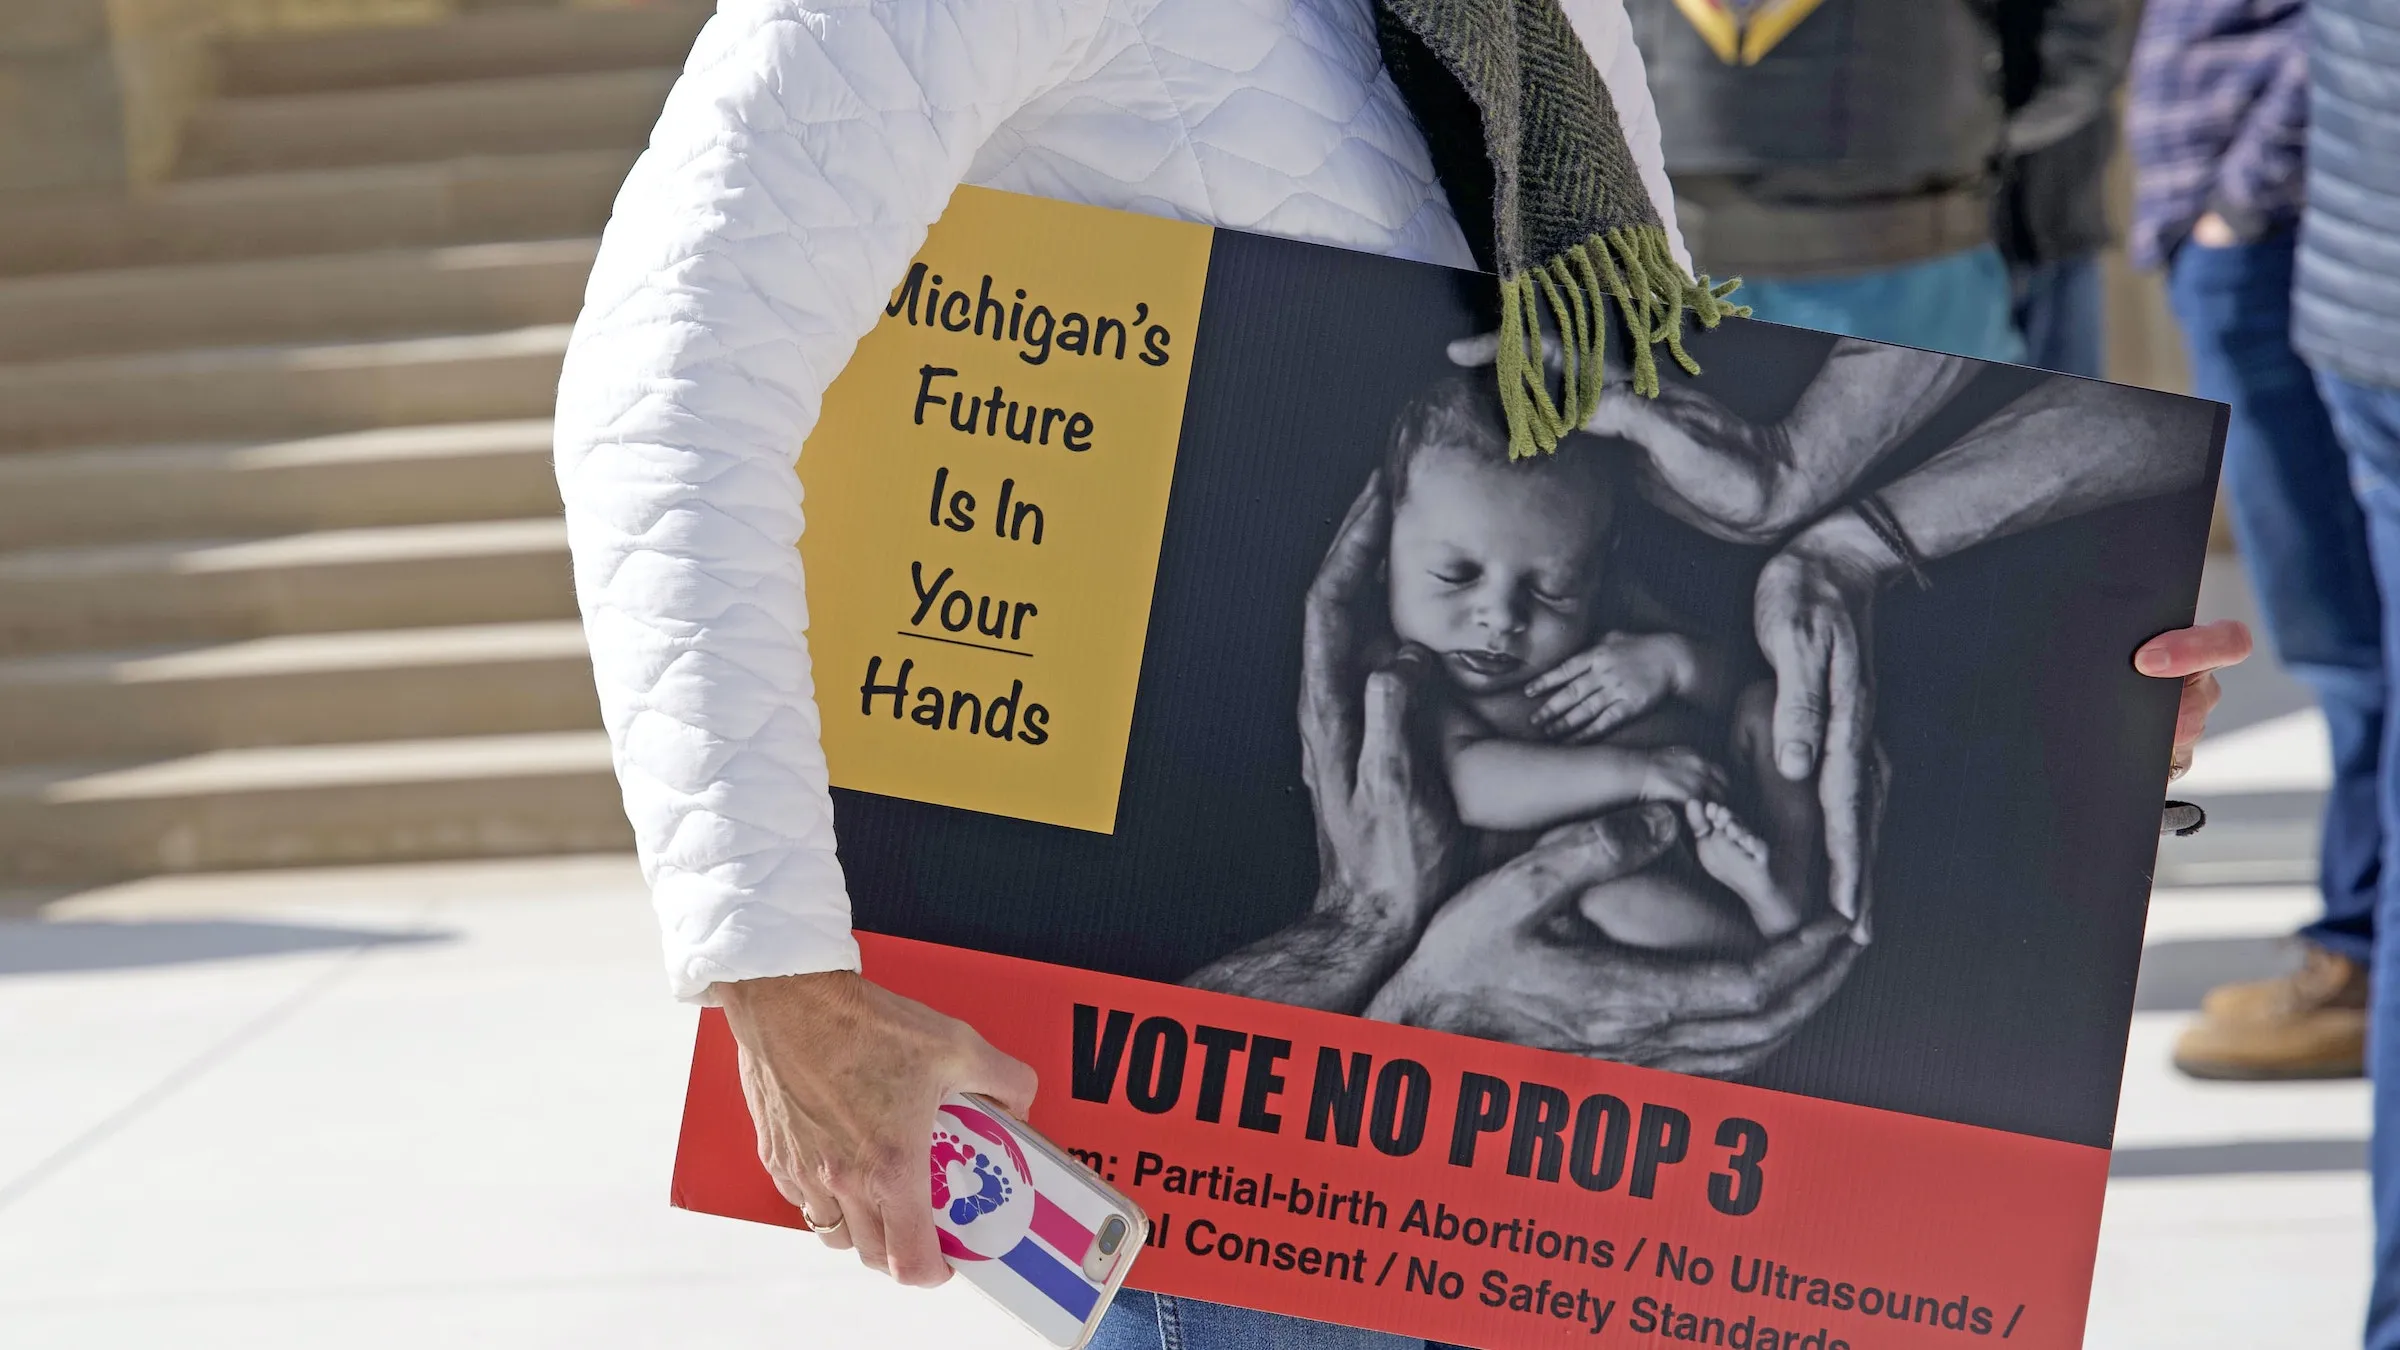 A woman carries a sign warning of the dangers of Proposal 3, the so-called "Reproductive Freedom for All" constitutional amendment, during a rally on Oct. 15, 2022, at the state capitol building in Lansing, Michigan. If the controversial proposal passes, it would mean the end of all abortion-related regulation in Michigan, including for children and minors.?w=200&h=150